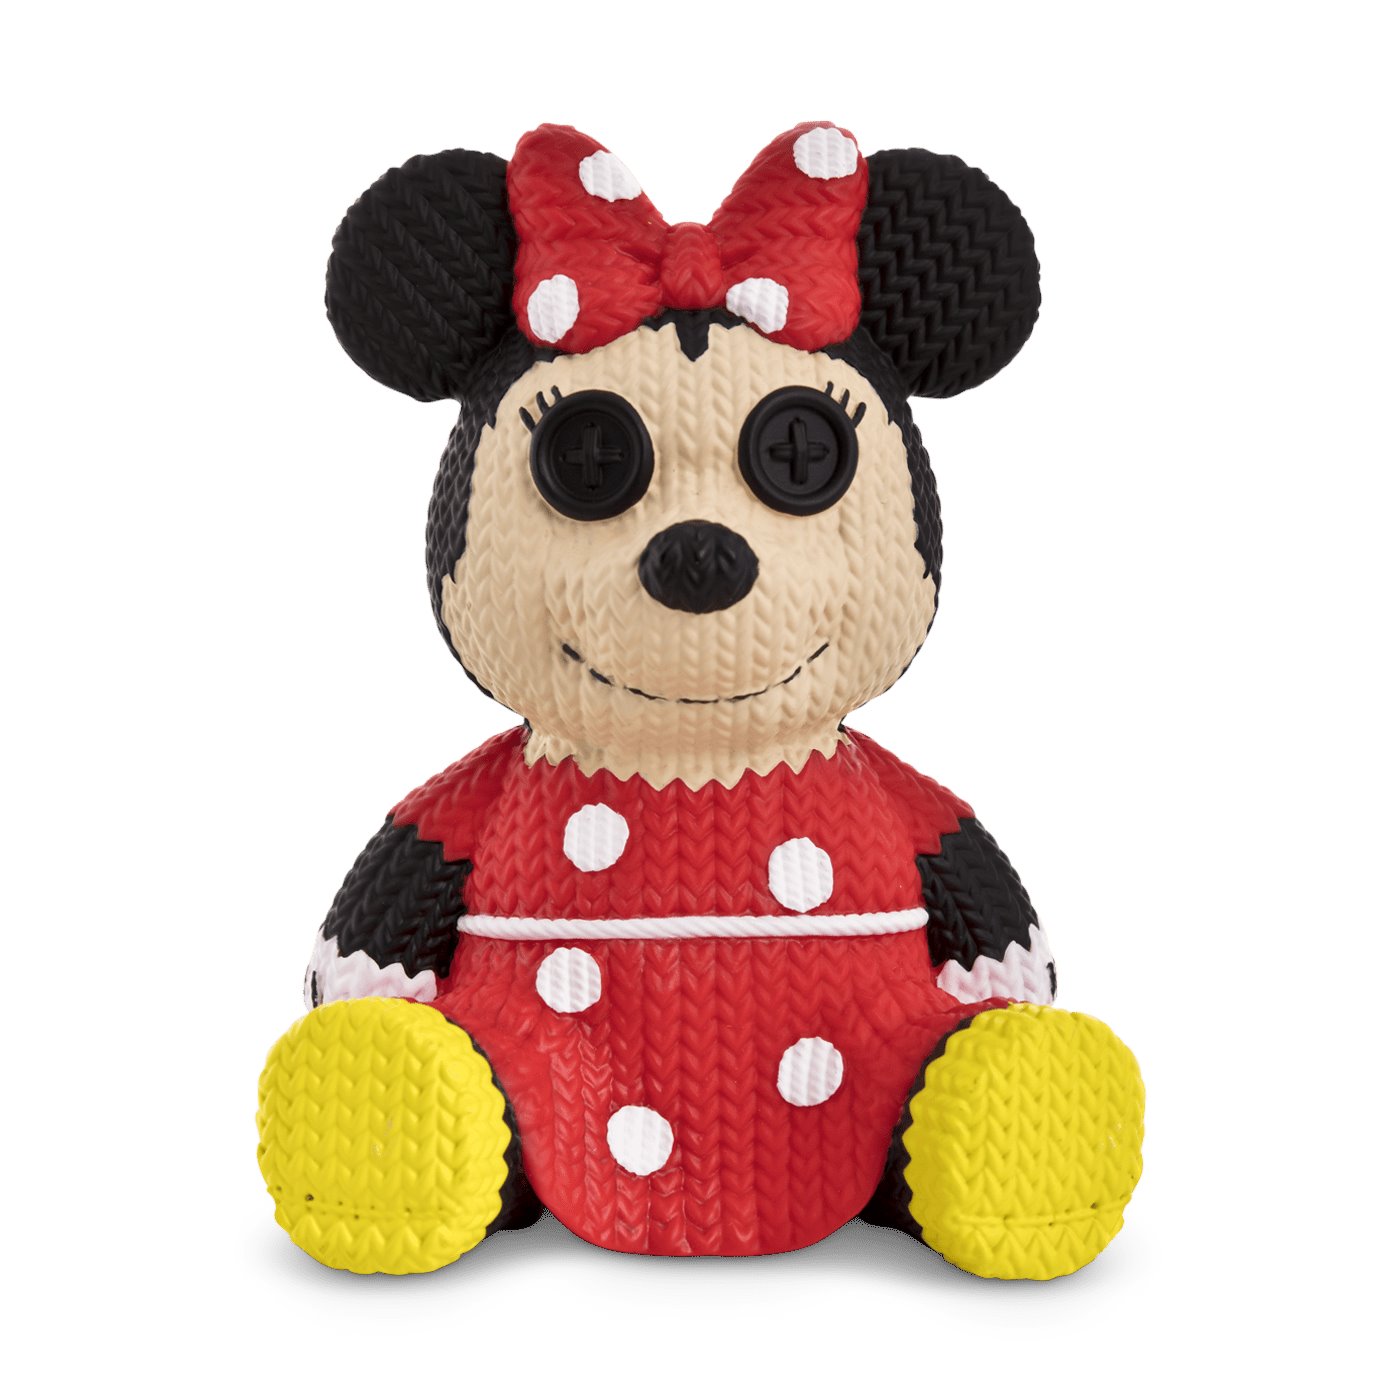 In Stock: Handmade By Robots Classic Disney - MINNIE MOUSE Vinyl Figure!